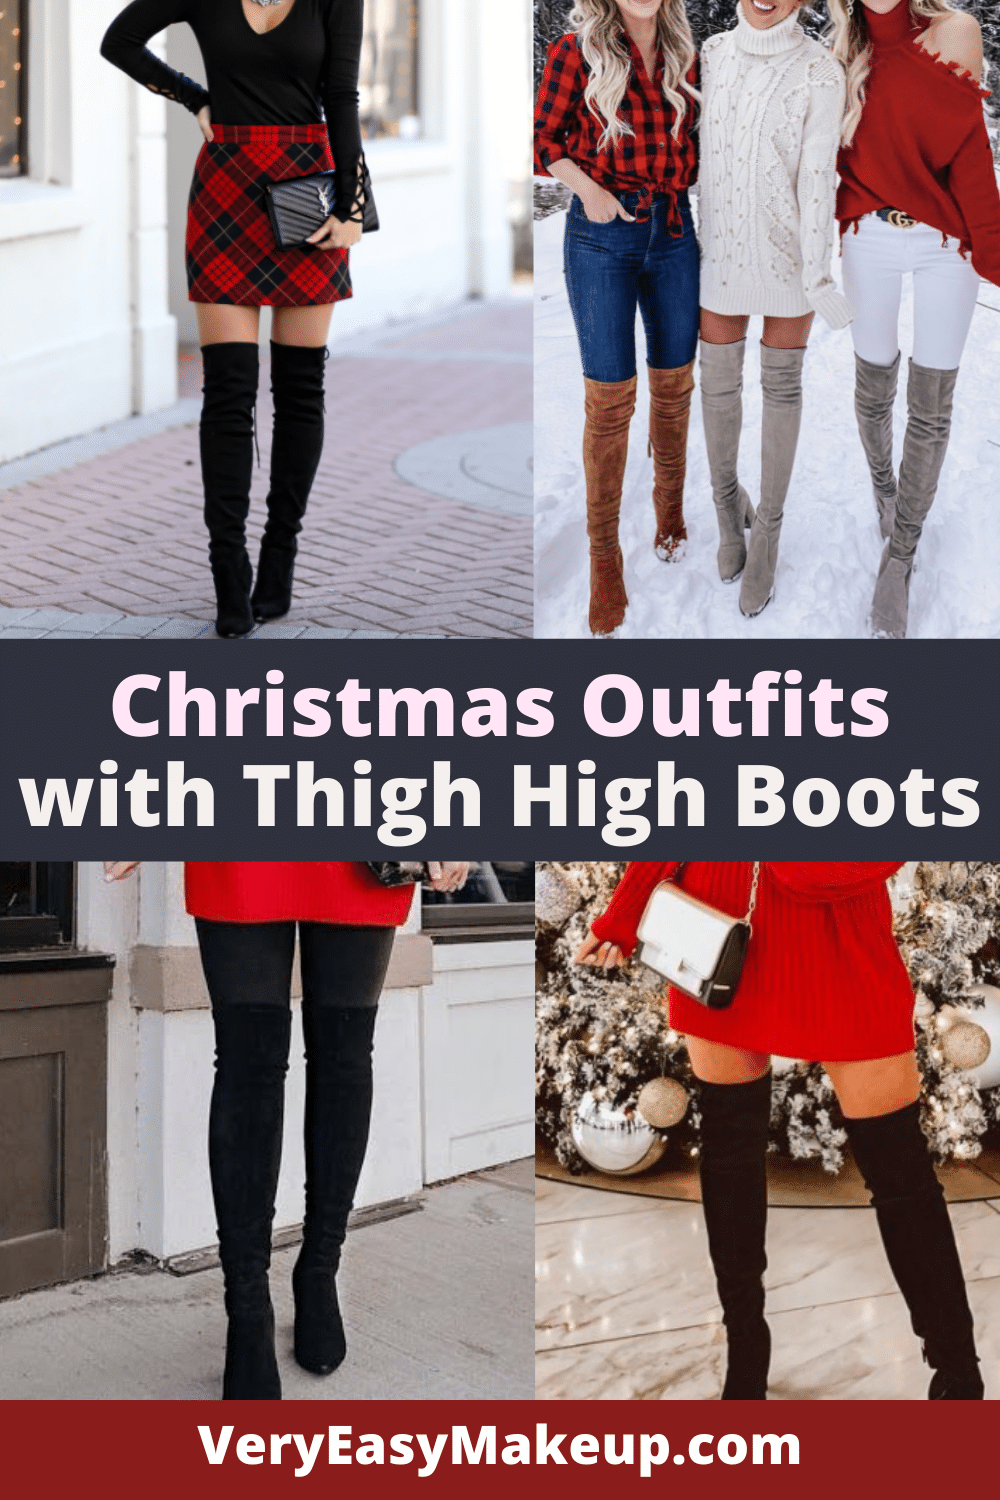 Sexy Christmas Outfits with Thigh High Boots by Very Easy Makeup